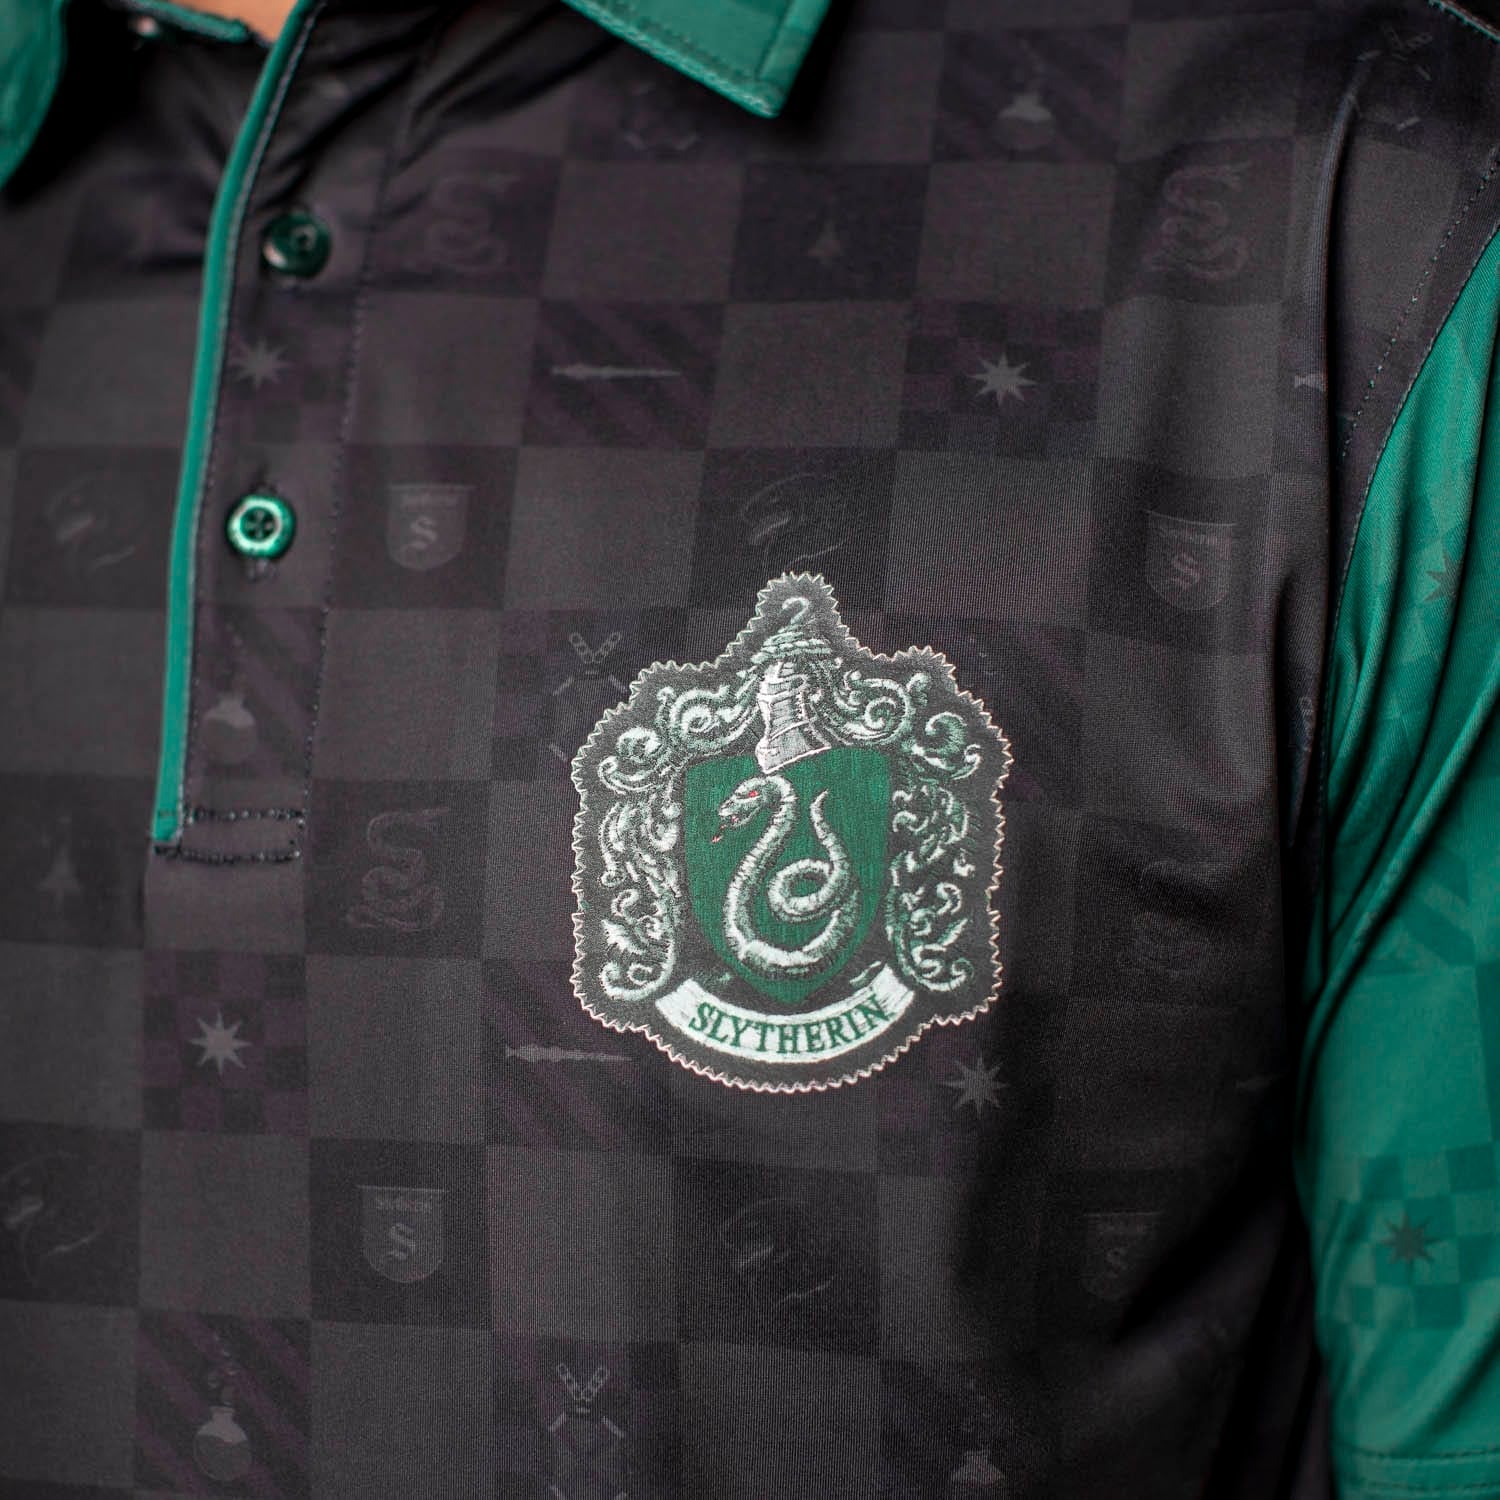 Harry Potter Slytherin – All-Day Polo